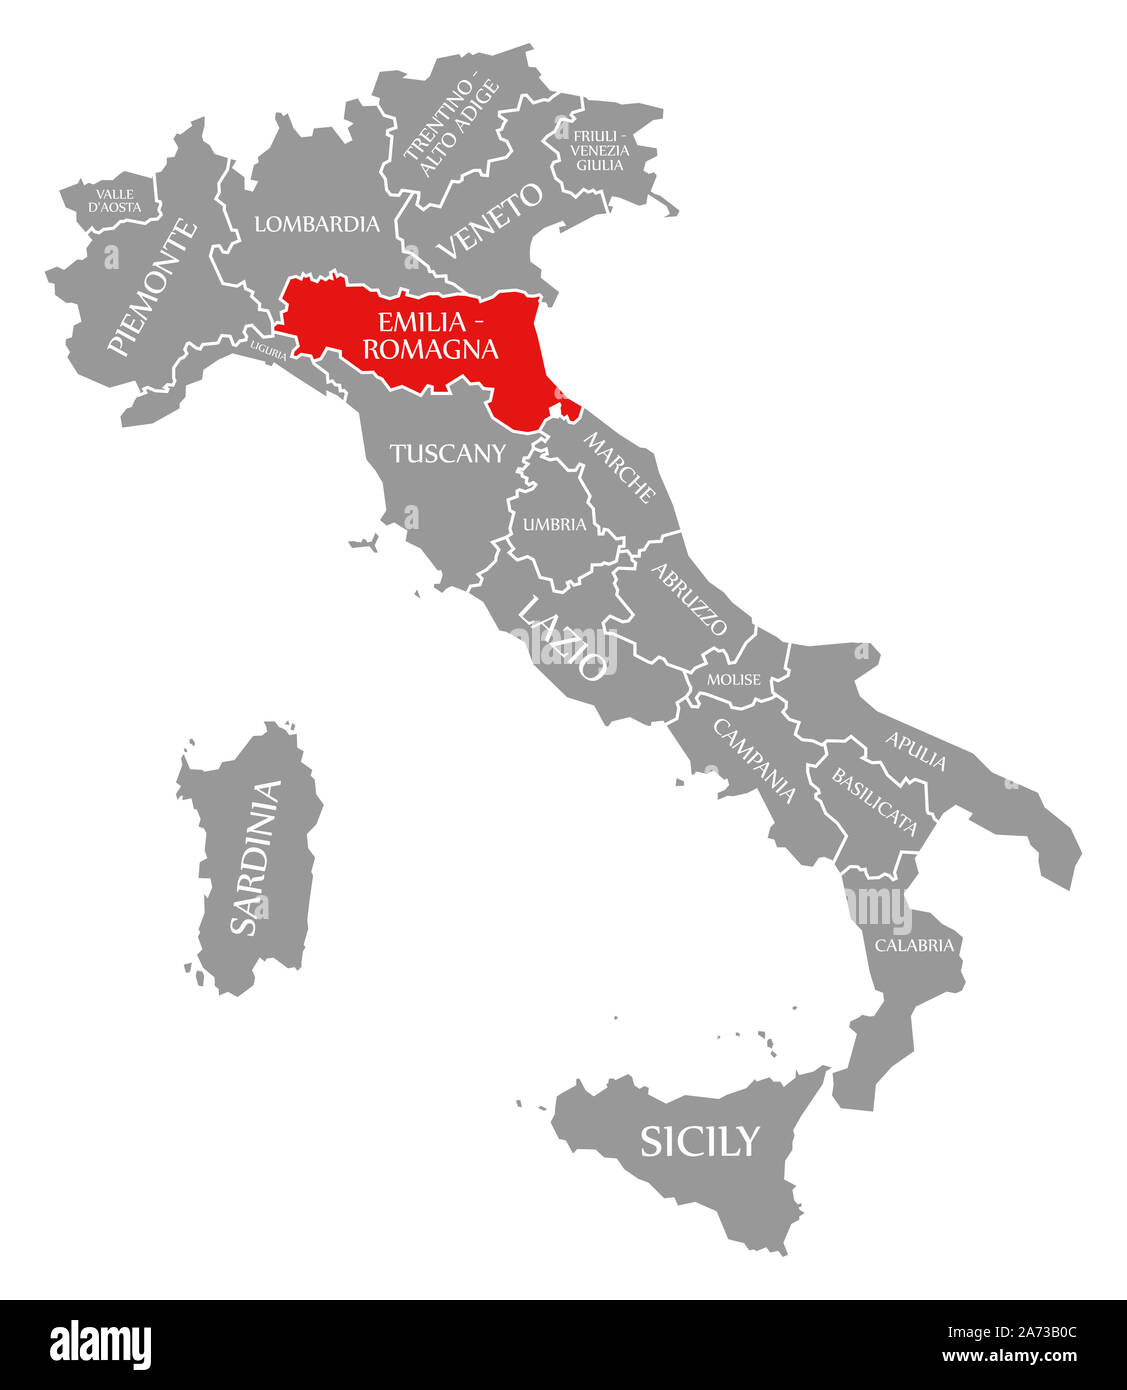 Emilia-Romagna red highlighted in map of Italy Stock Photo